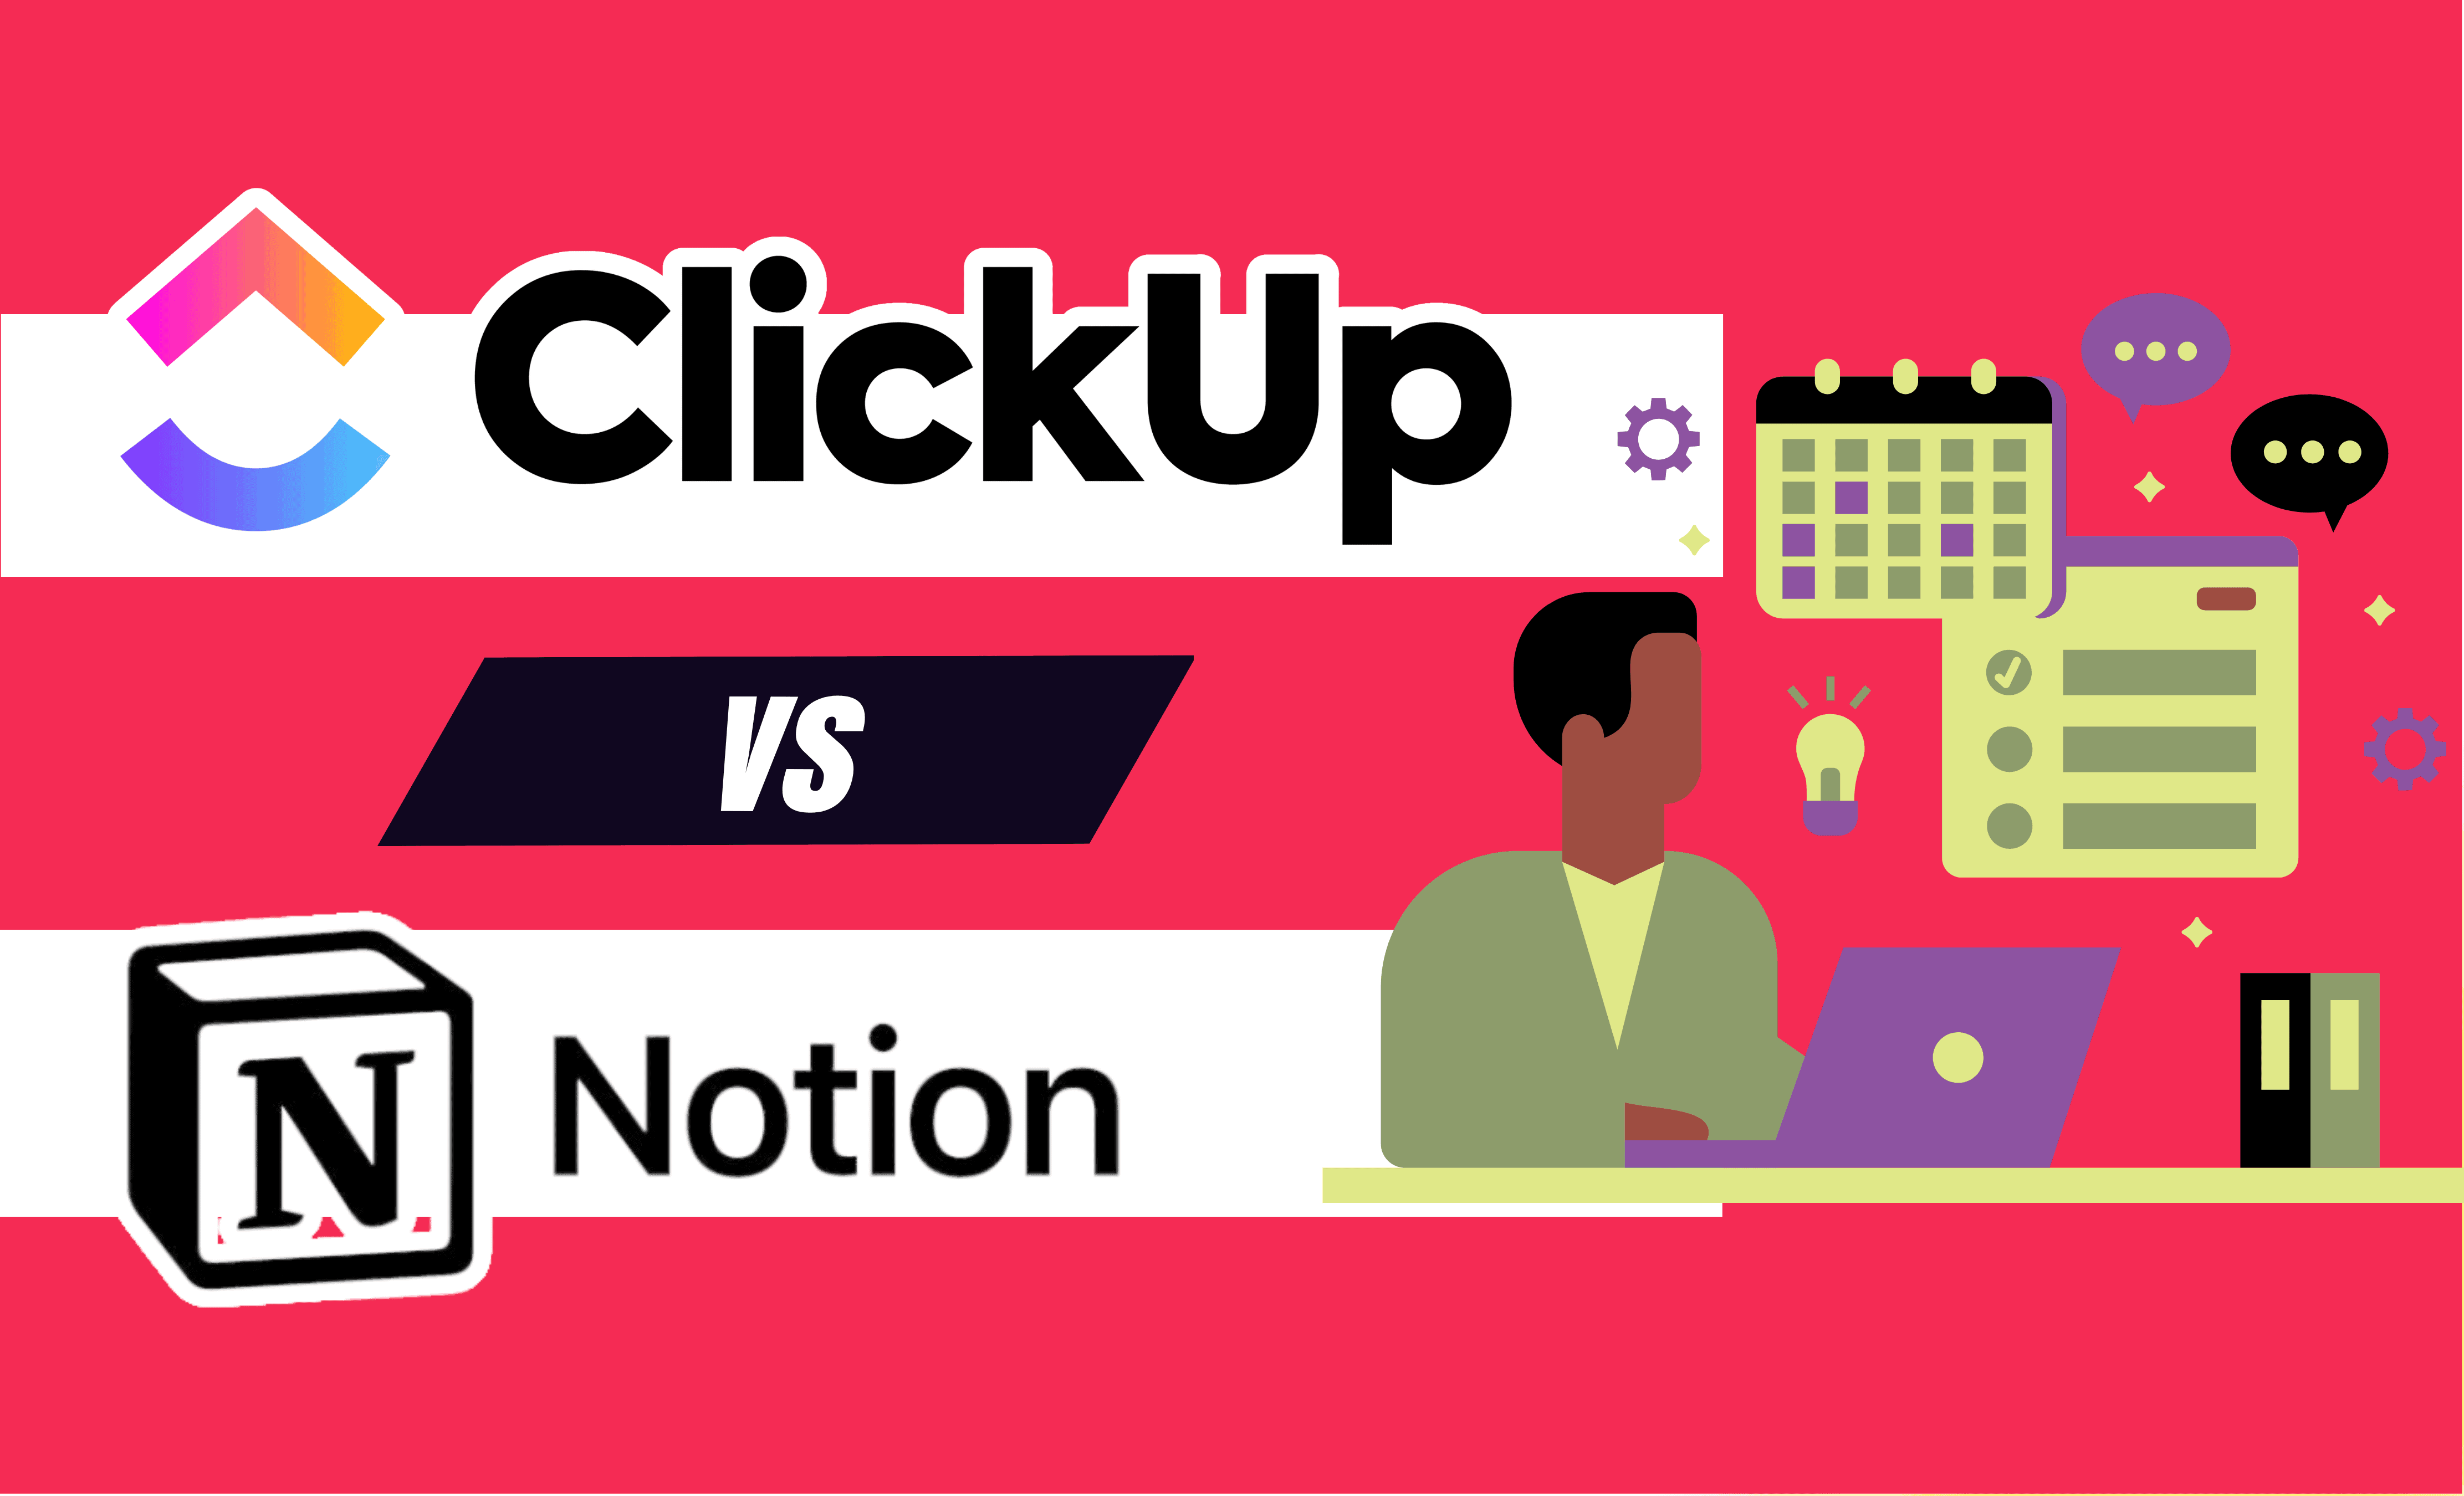 ClickUp Vs Notion: Which Tool is Better?